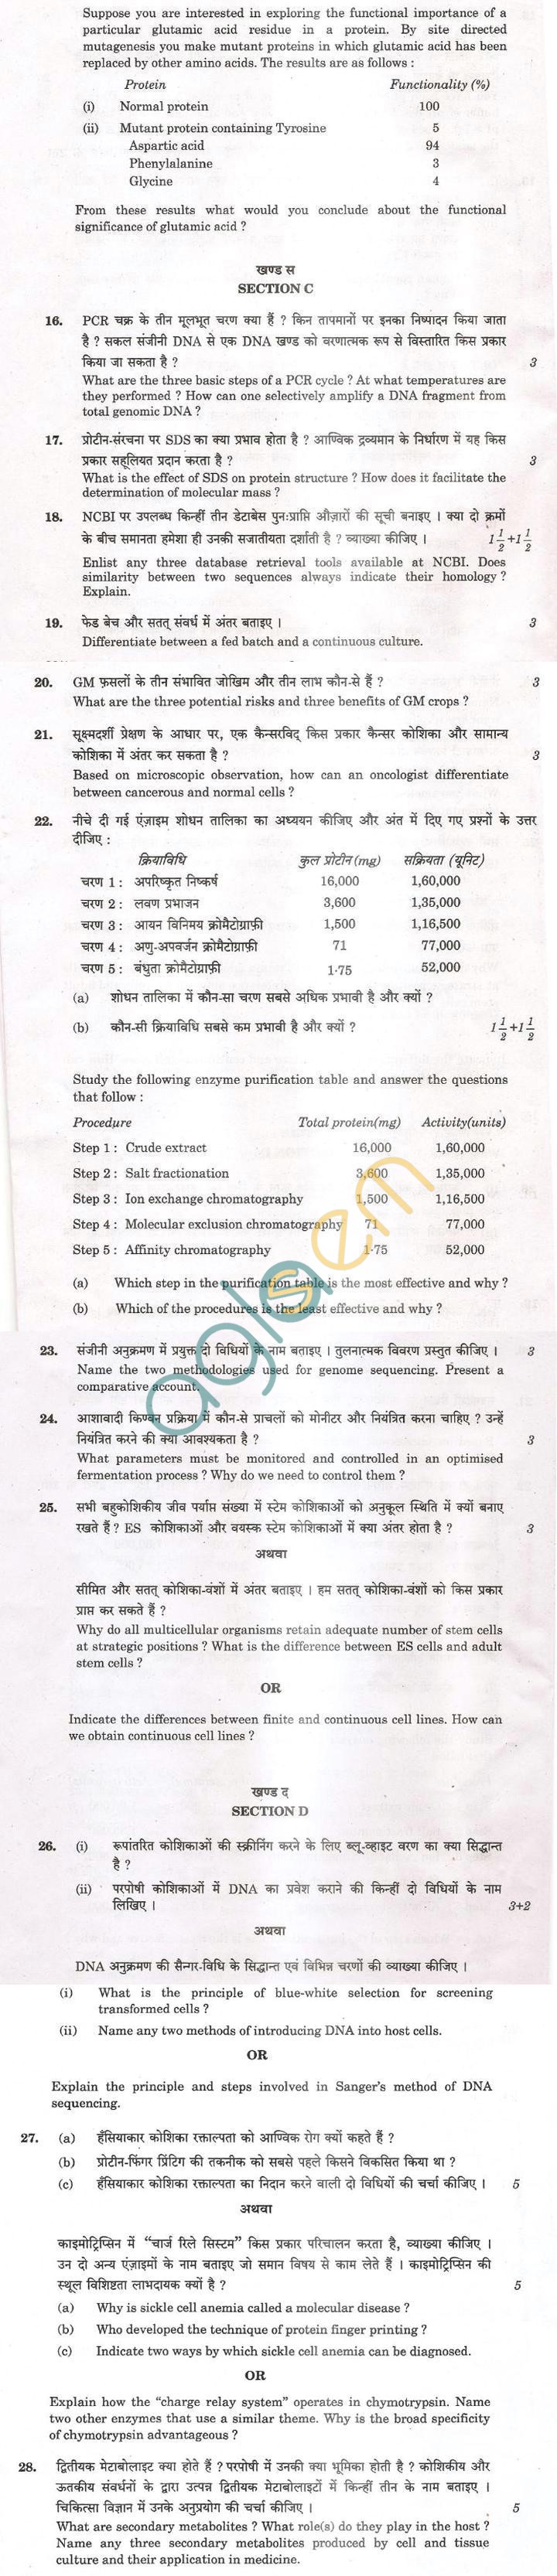 CBSE Compartment Exam 2013 Class XII Question Paper - Biotechnology